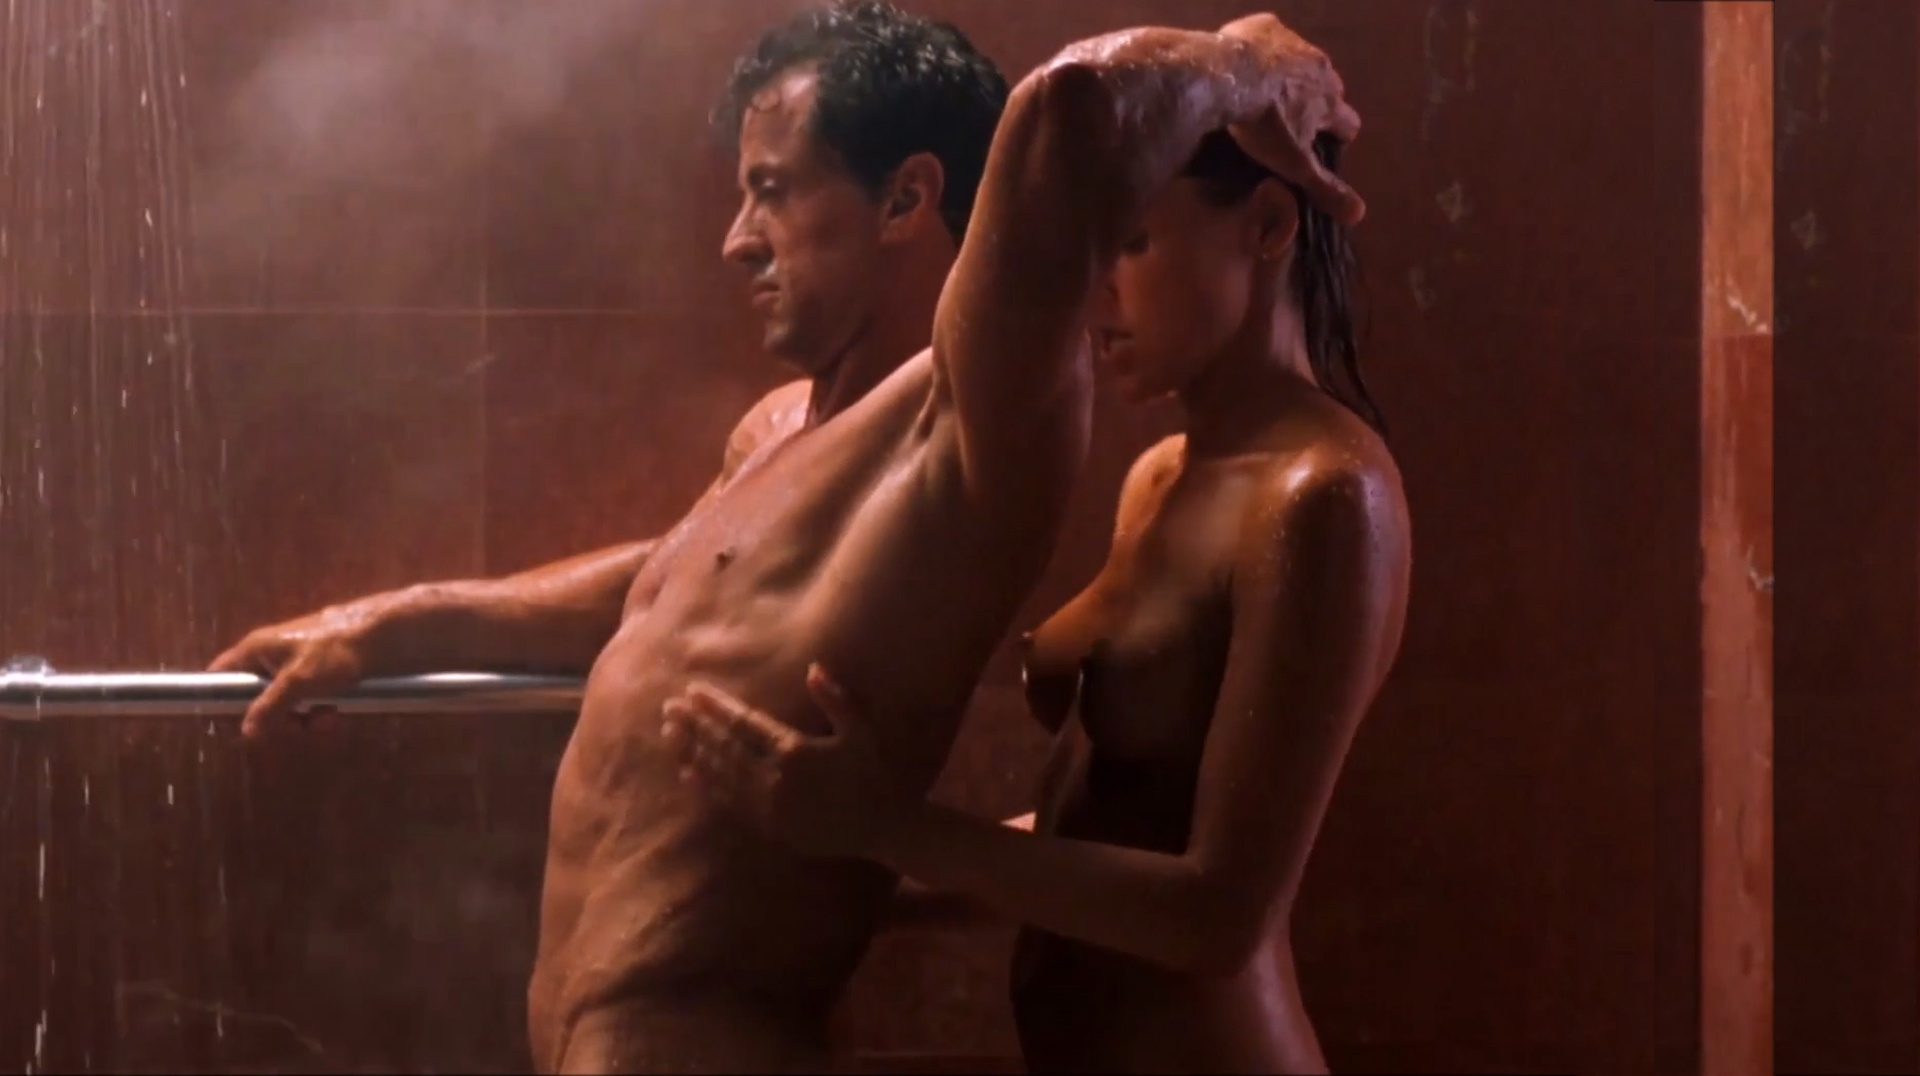 Sharon stone nude scenes from